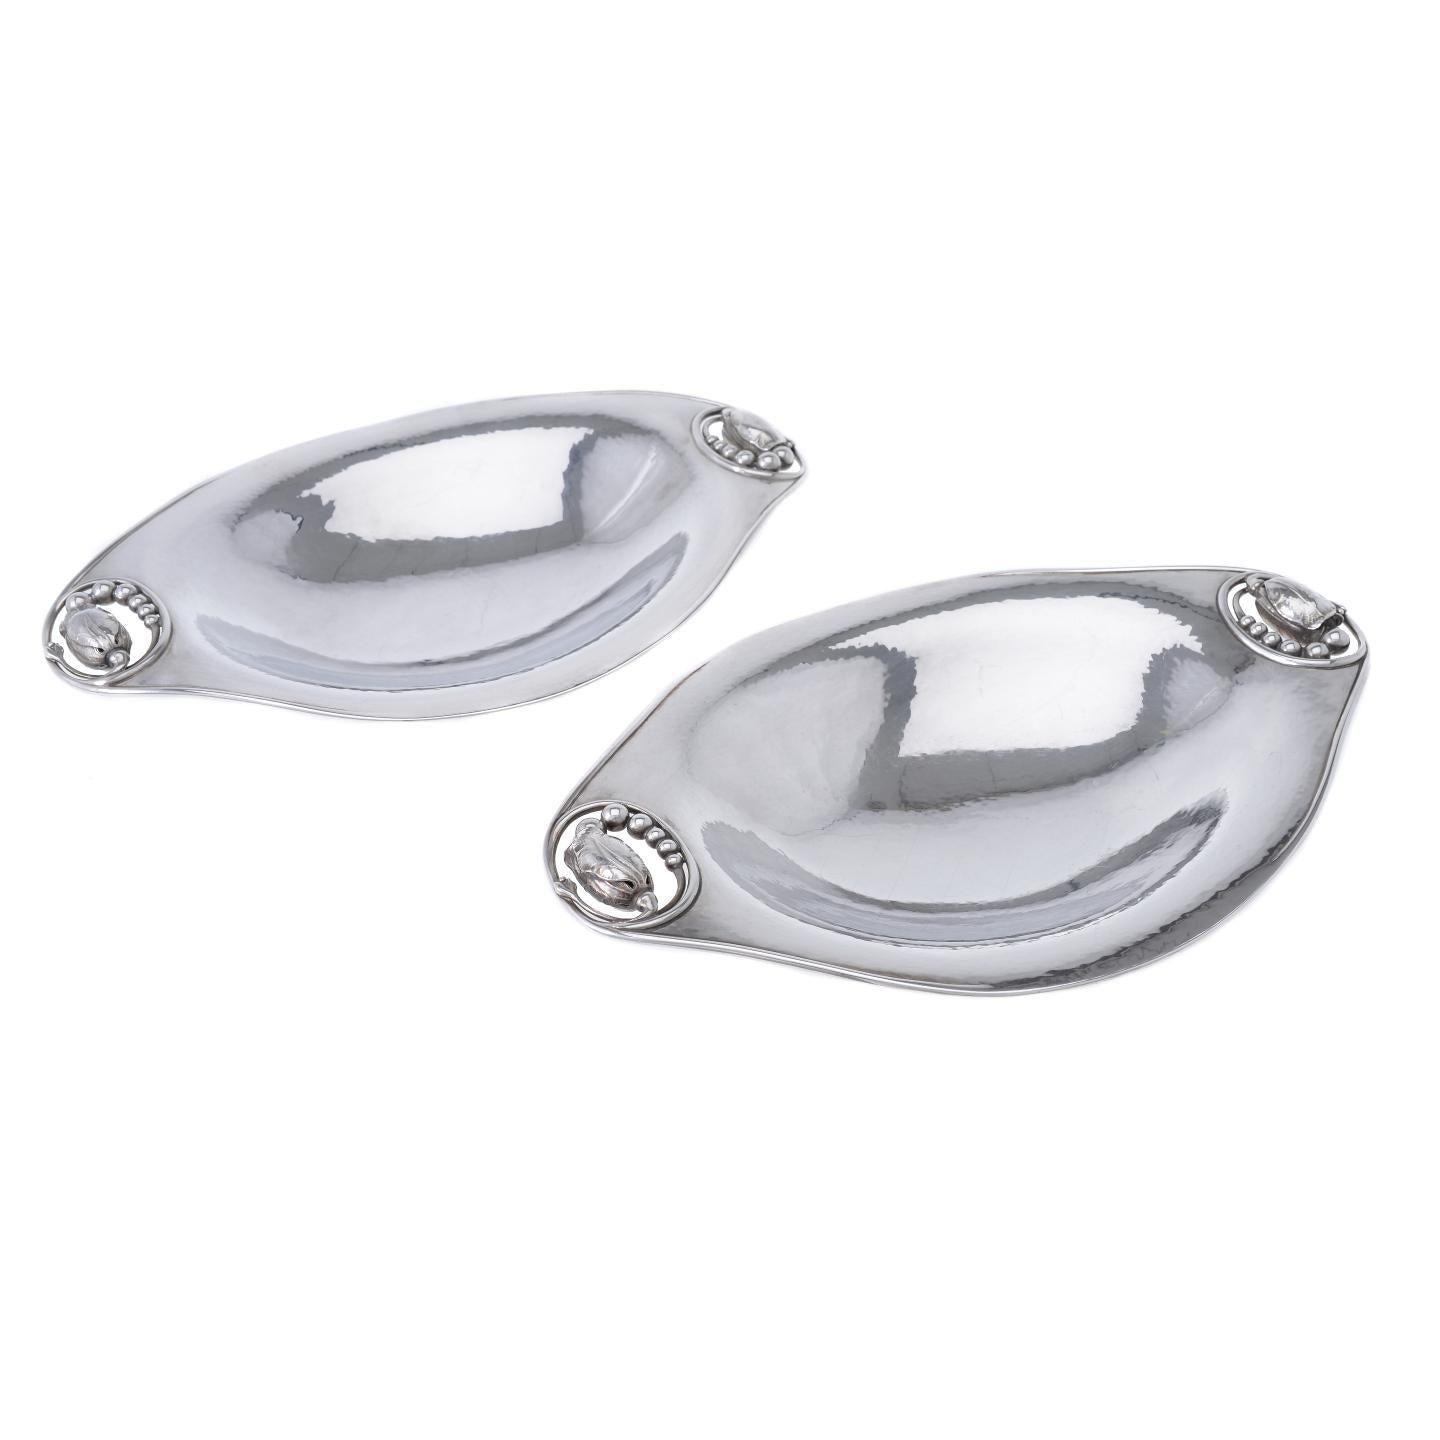 Pair of Georg Jensen Sterling Blossom or Magnolia Bread Trays 2A im Angebot